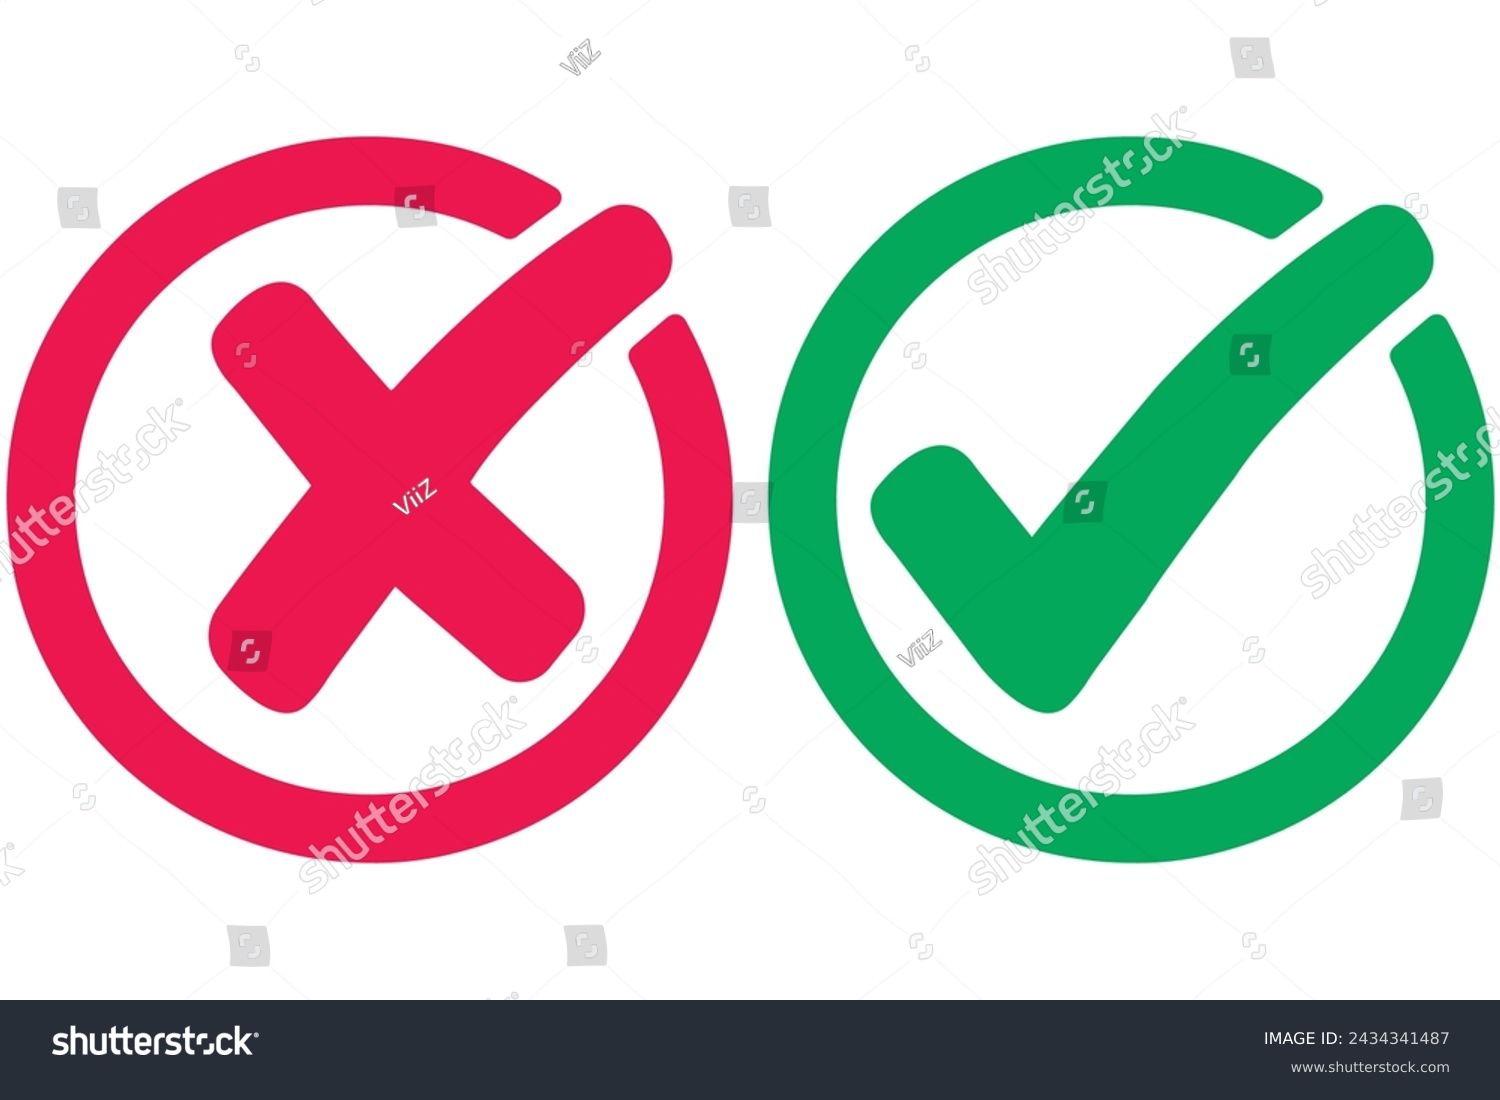 SVG of right and wrong icon with green and red, correct and incorrect symbol to guarantee the idea, agreement sign to confirm the right answer svg